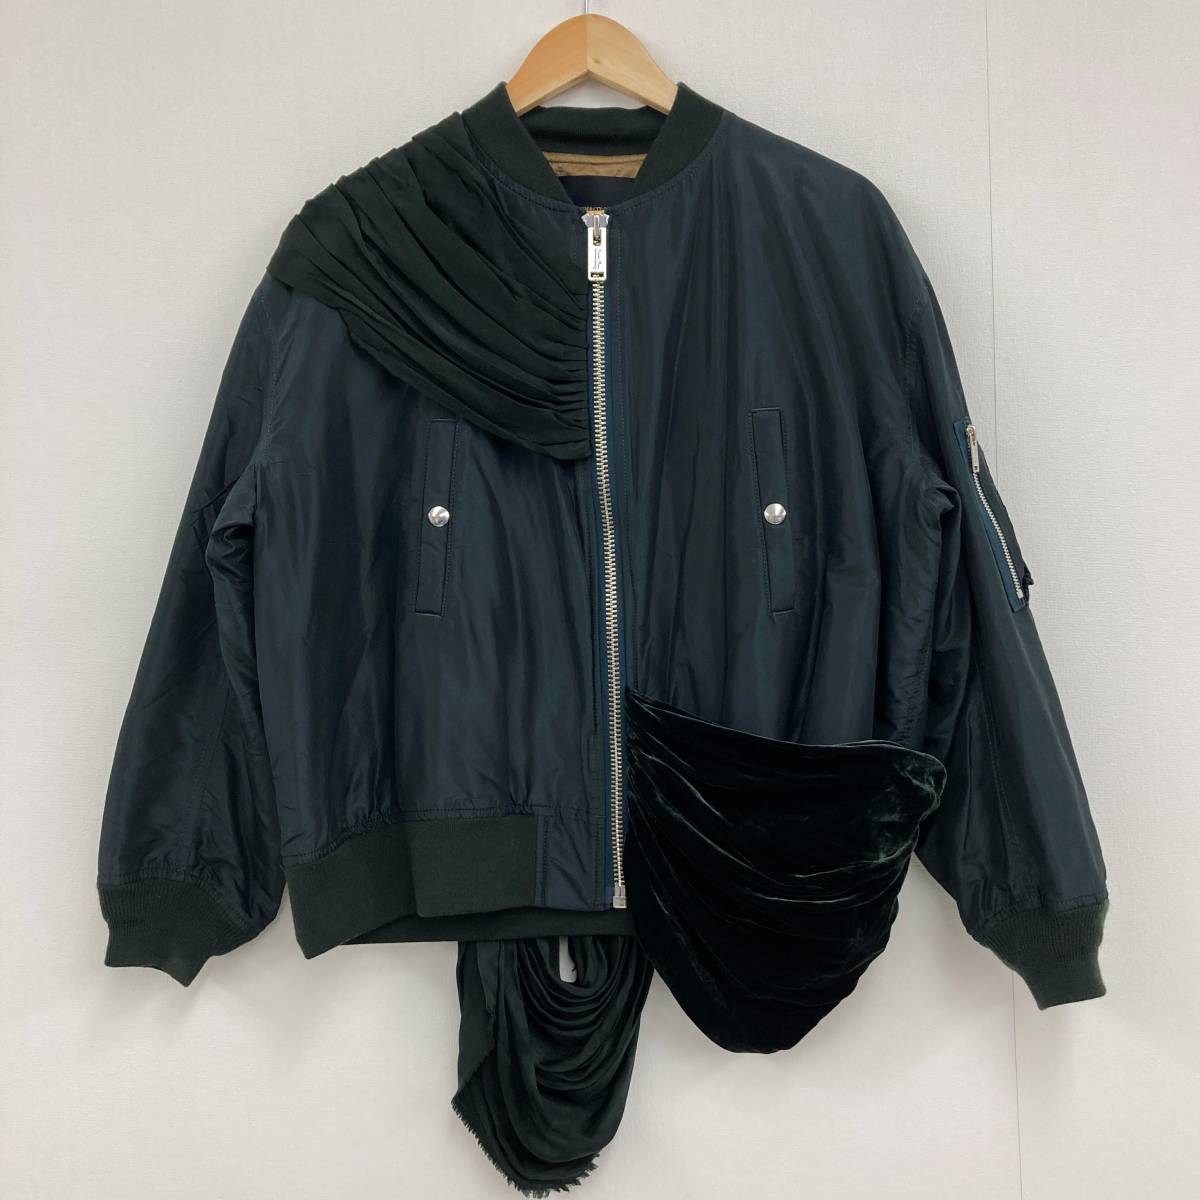 UNDERCOVERdore-pdo King Bomber jacket green 1 size undercover unusual material MA-1 blouson UNDER COVER archive 2090545